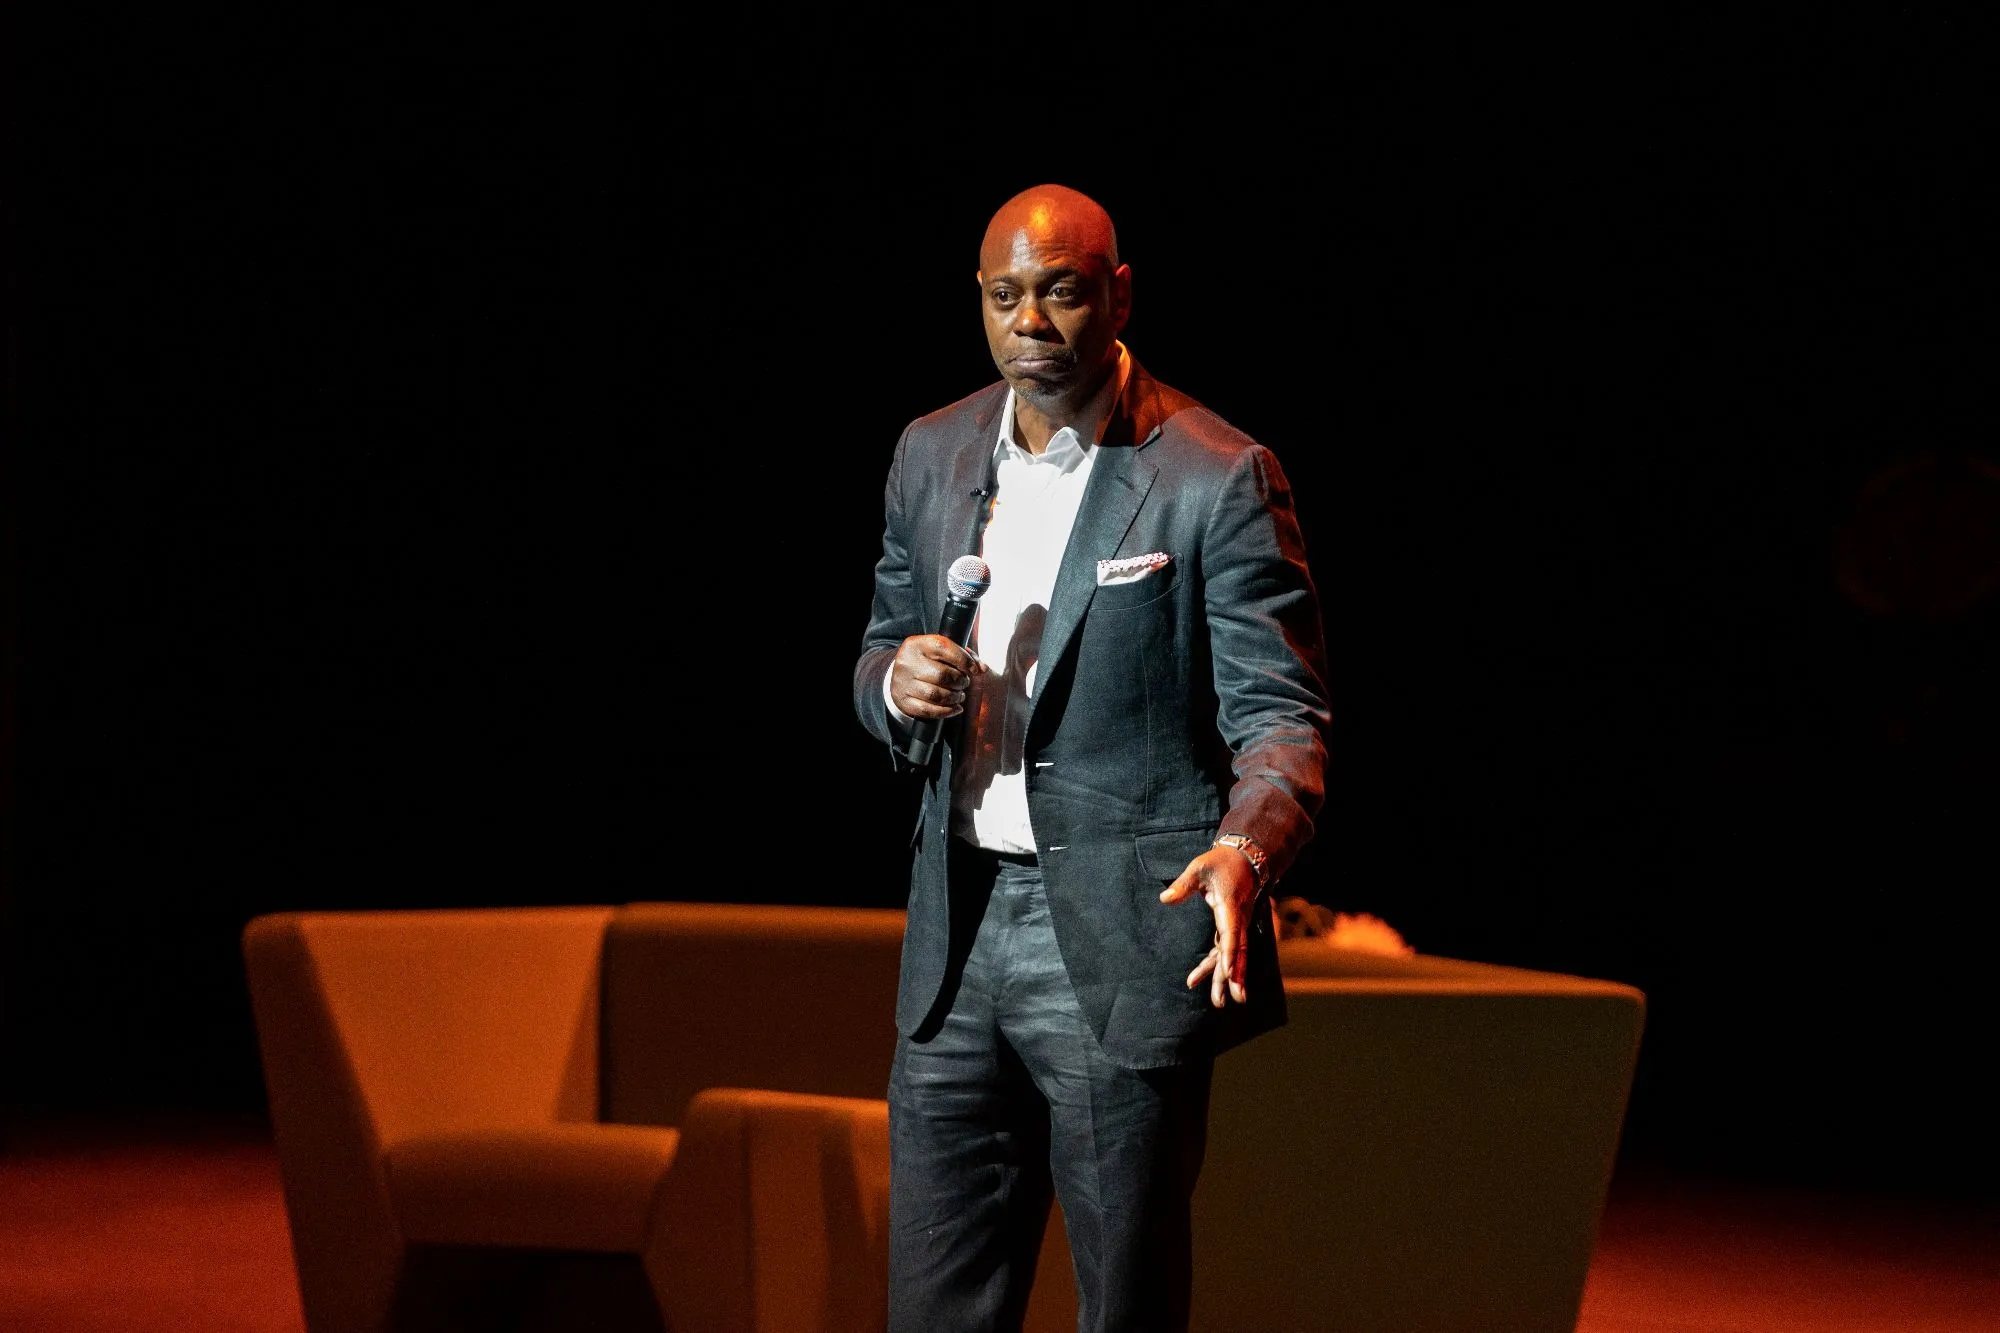 Dave Chappelle Criticizes Israel, Sparks Walk-Outs In Boston Show